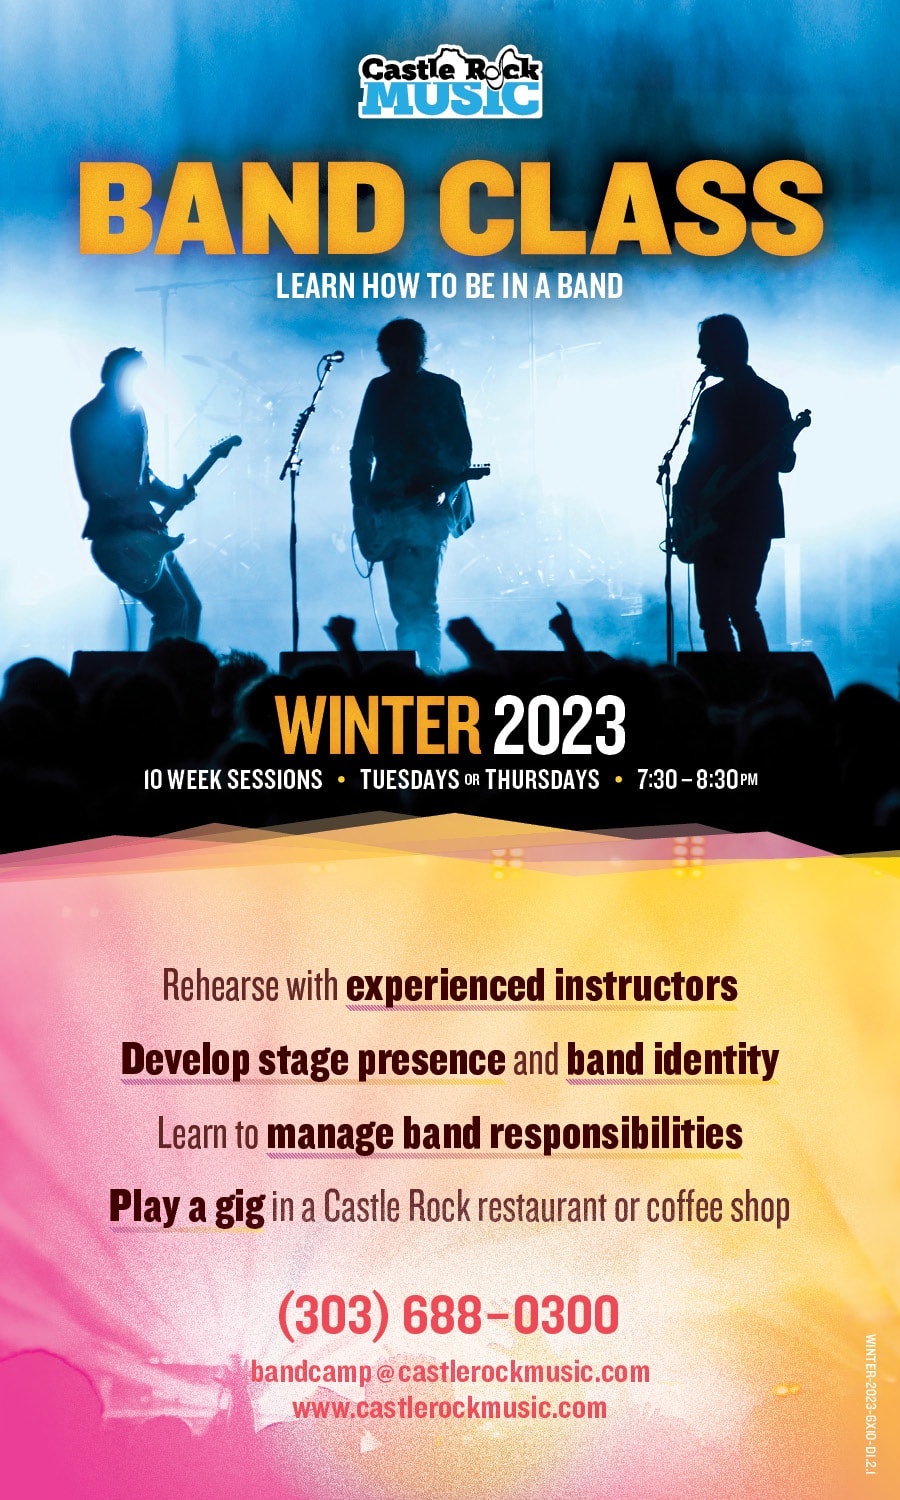 Band Class (Winter 2023)  |  10 Week Sessions  |  Tuesdays or Thursdays  |  7:30 - 8:30pm